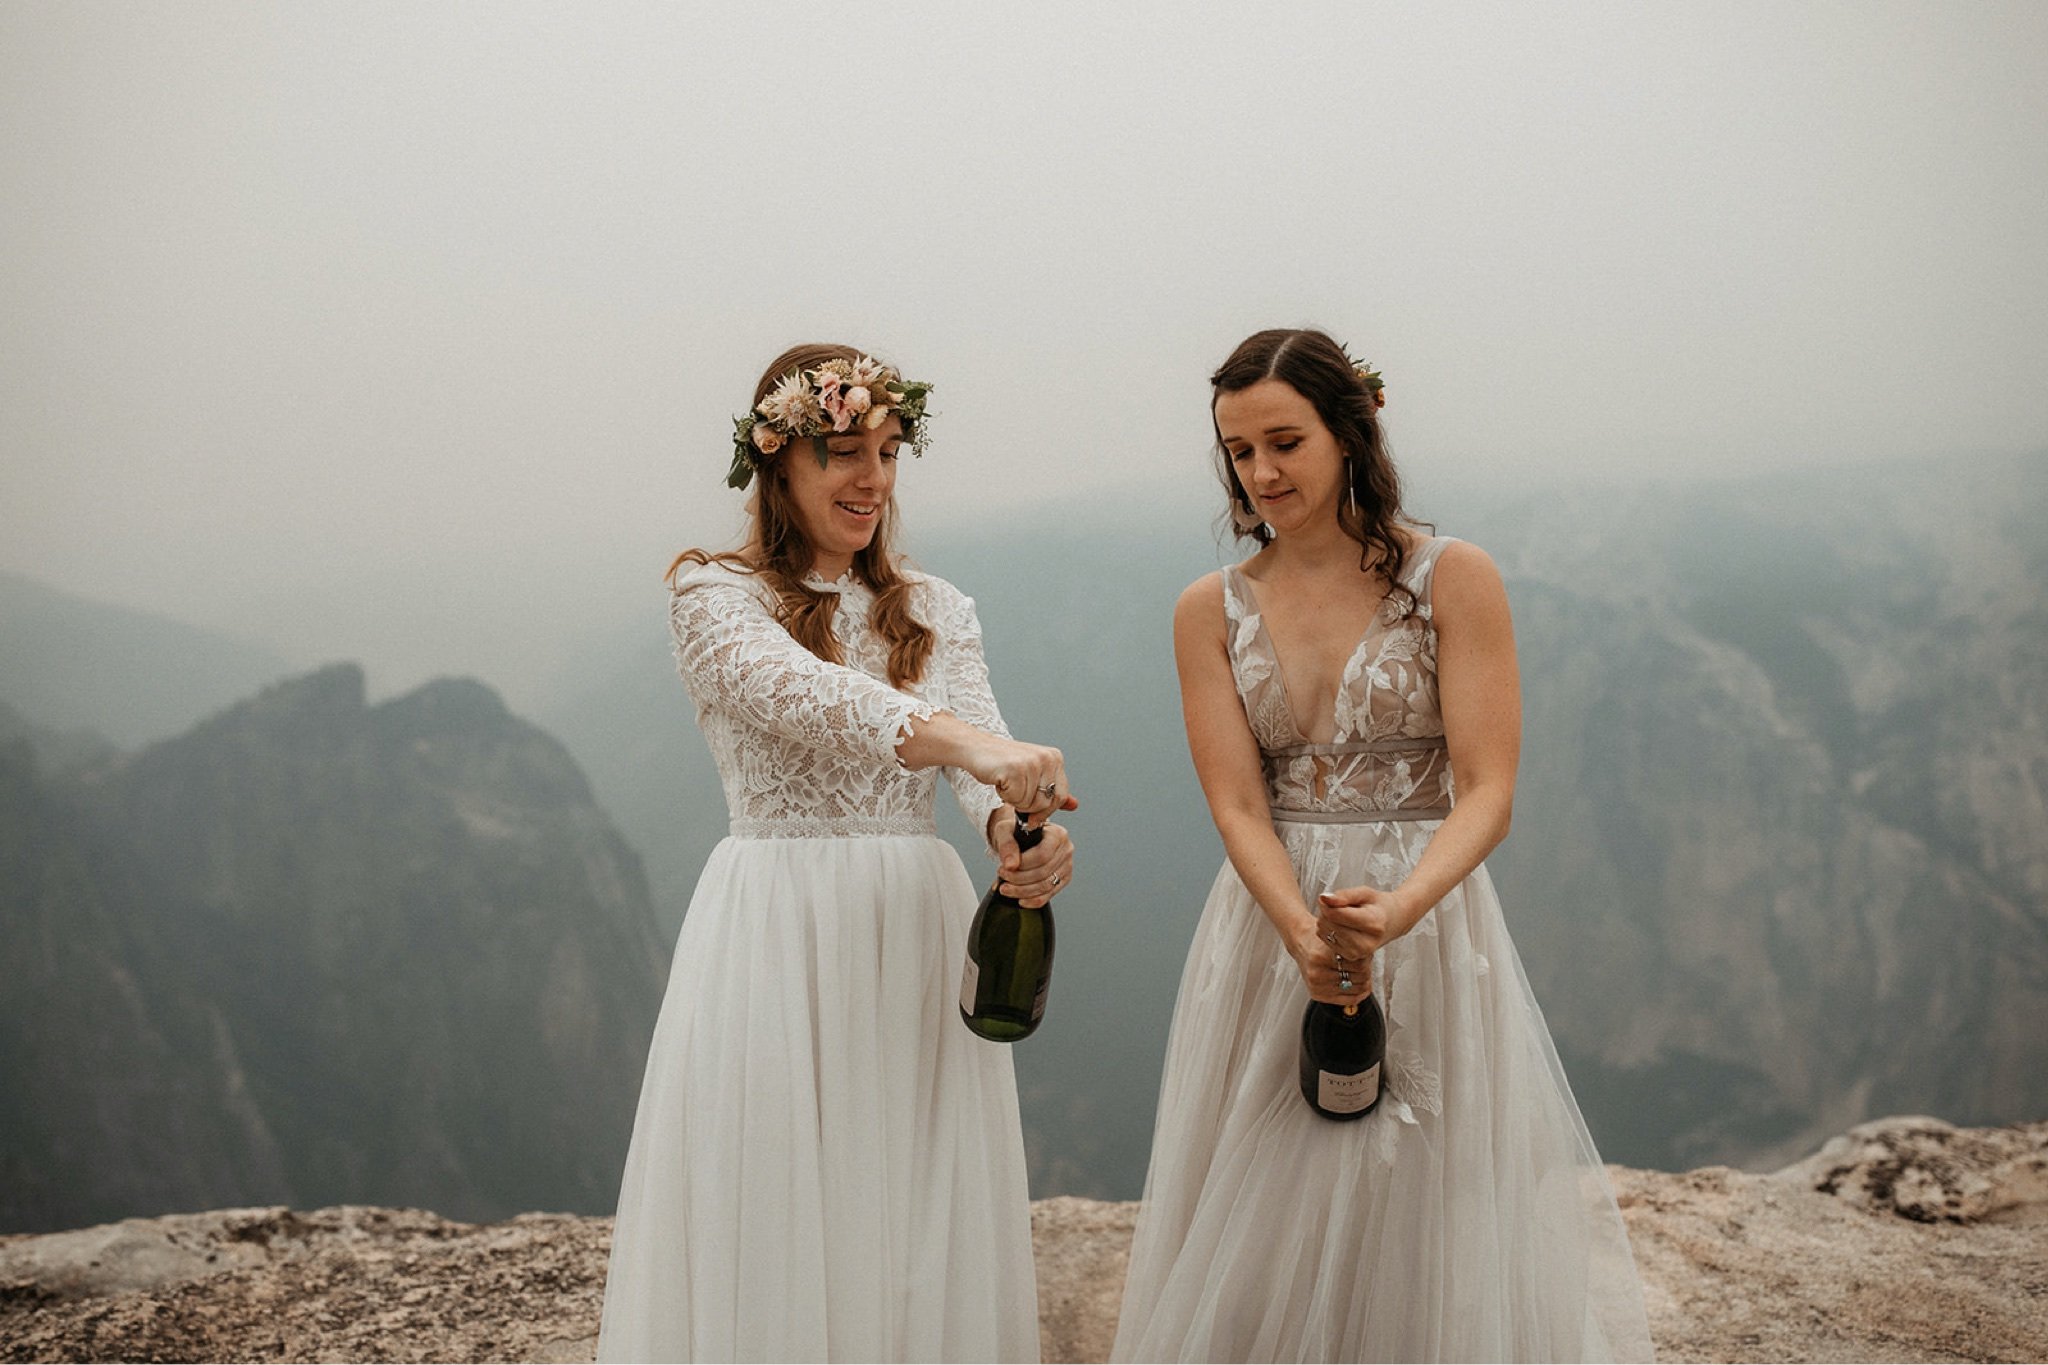 Yosemite National Park Elopement with Two Brides-Will Khoury38.jpg